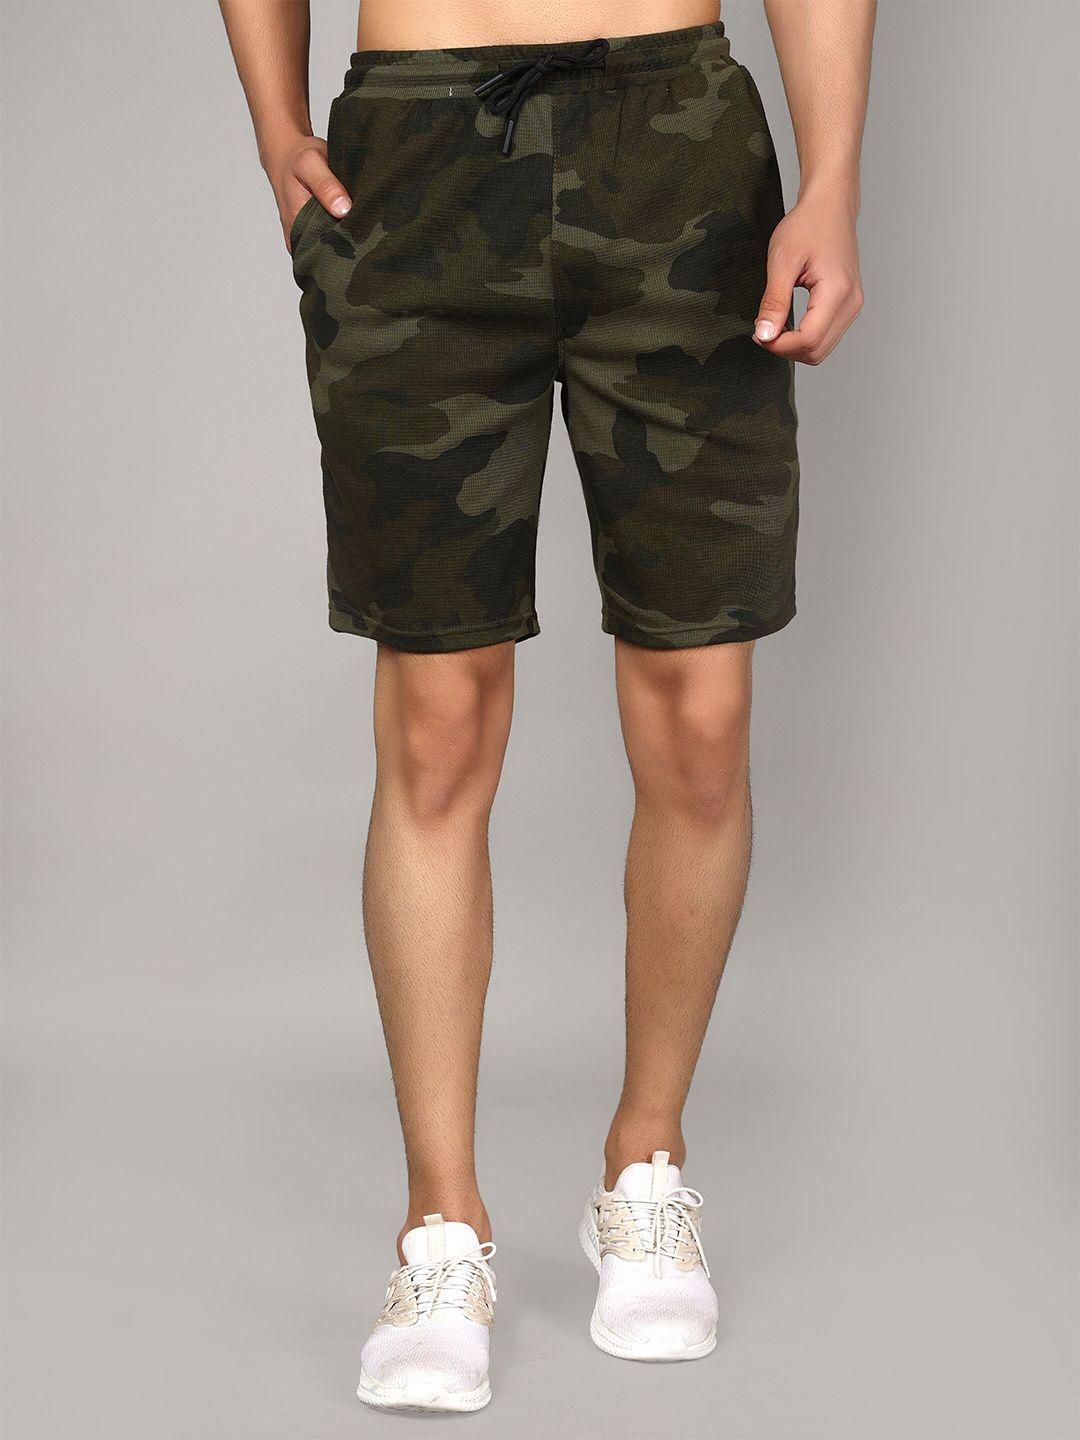 cot'n-soft-men-camouflage-printed-terry-cotton-shorts